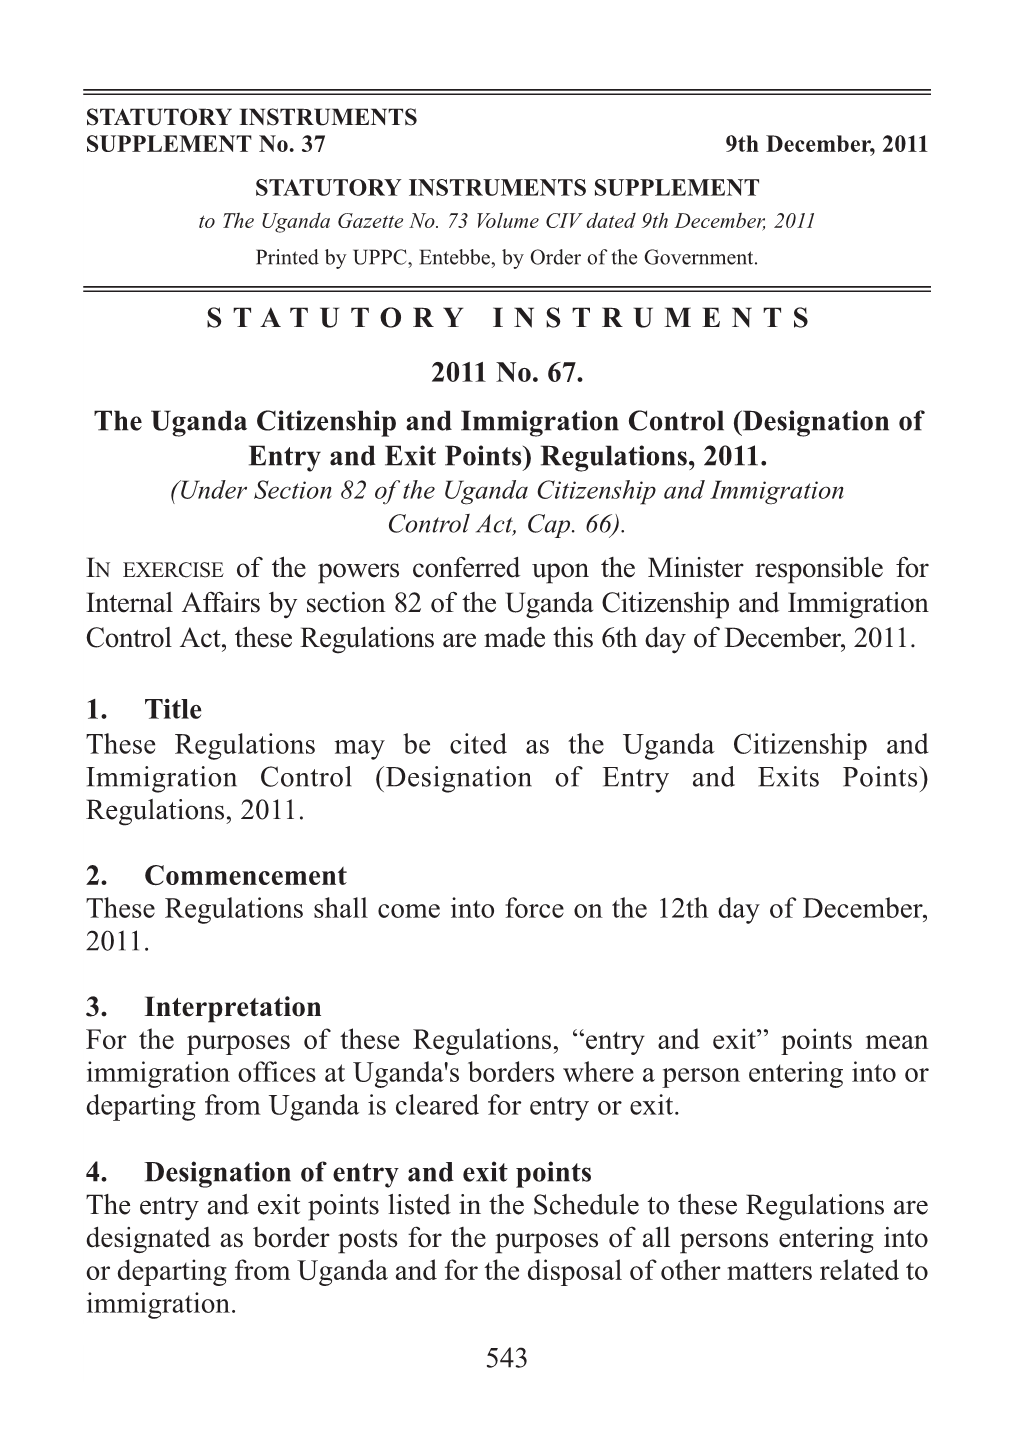 (Designation of Entry and Exit Points) Regulations, 2011. (Under Section 82 of the Uganda Citizenship and Immigration Control Act, Cap